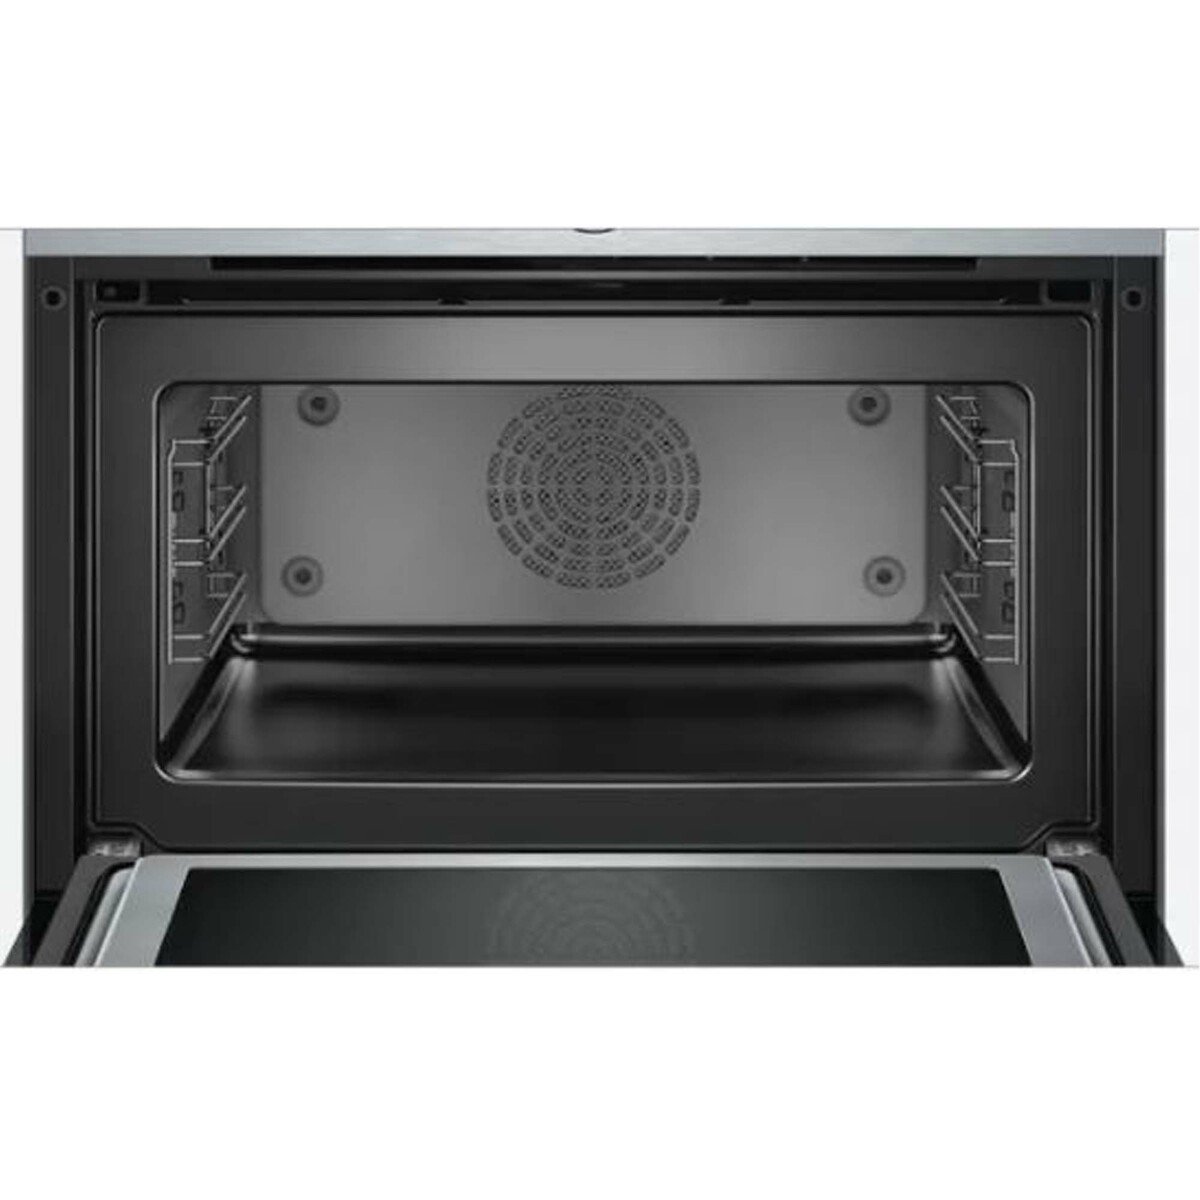 Bosch Built-in Oven CMG656BS1M 60cm